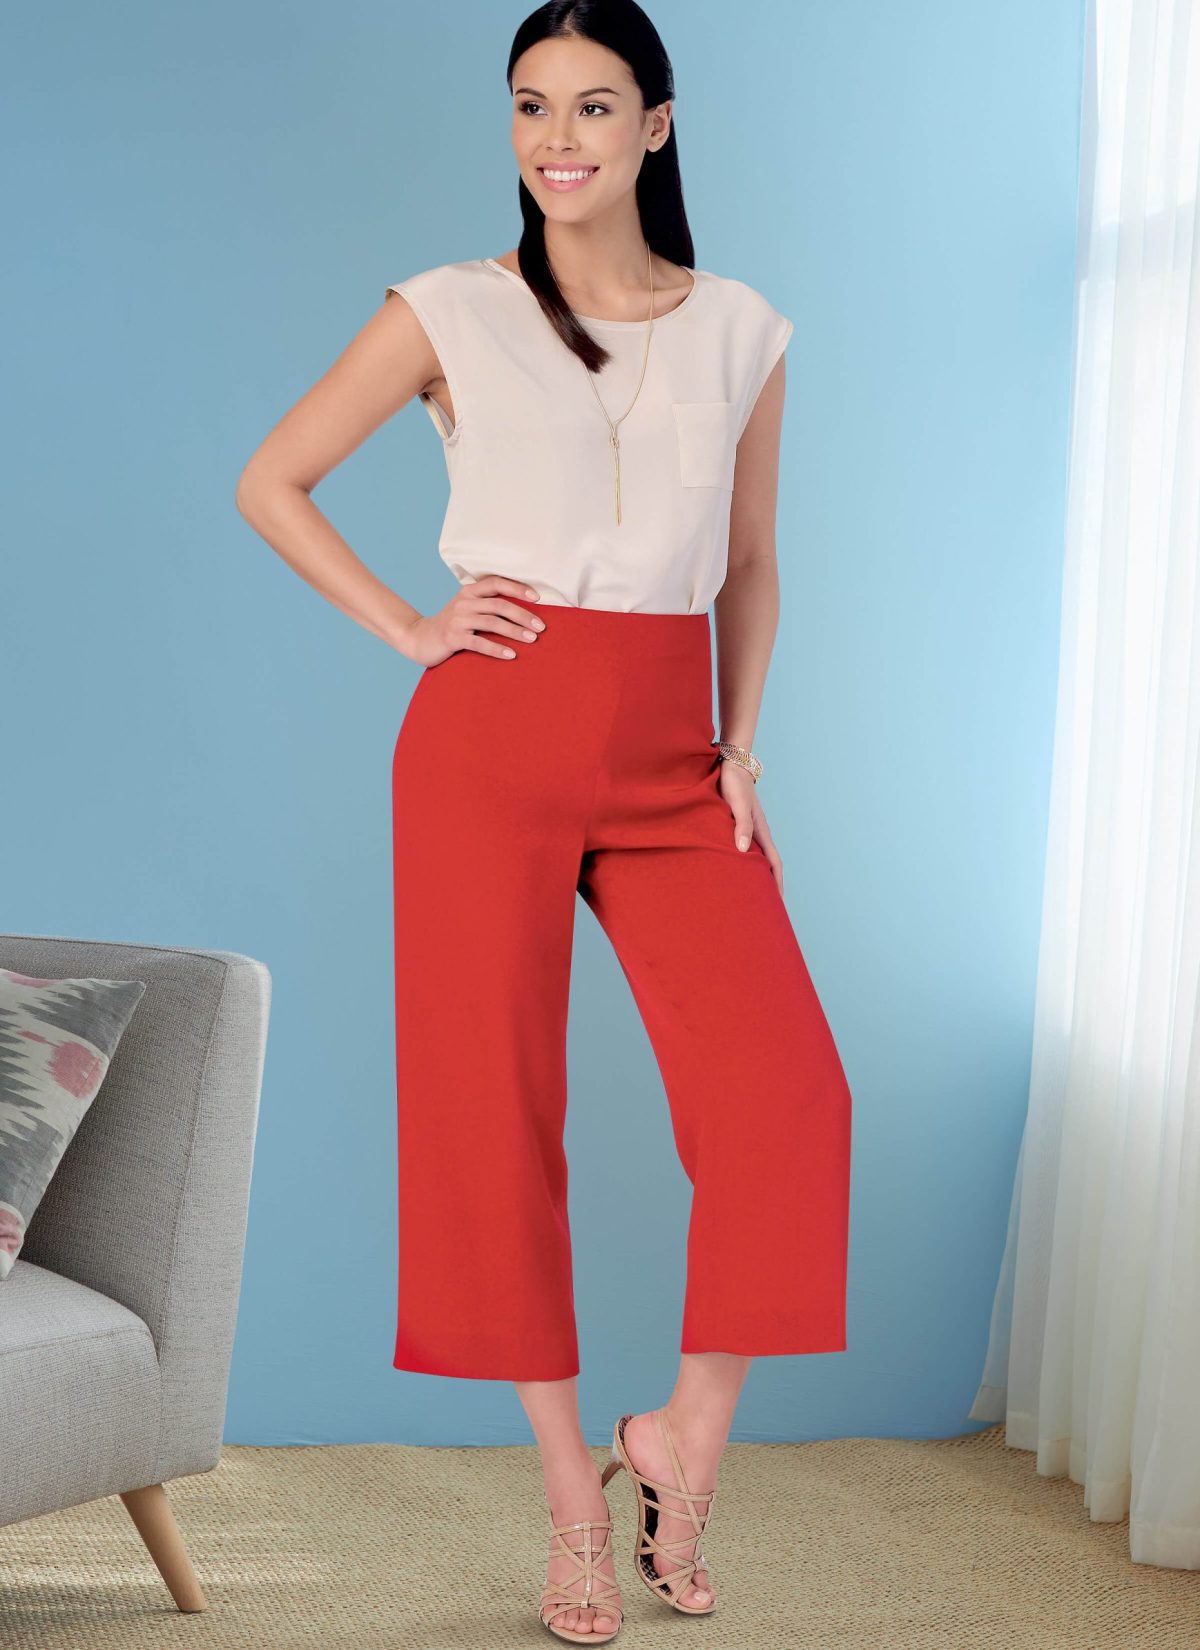 Butterick Sewing Pattern B6851 Misses' No-Side-Seam Shorts, Capris & Trousers Palmer/Pletsch